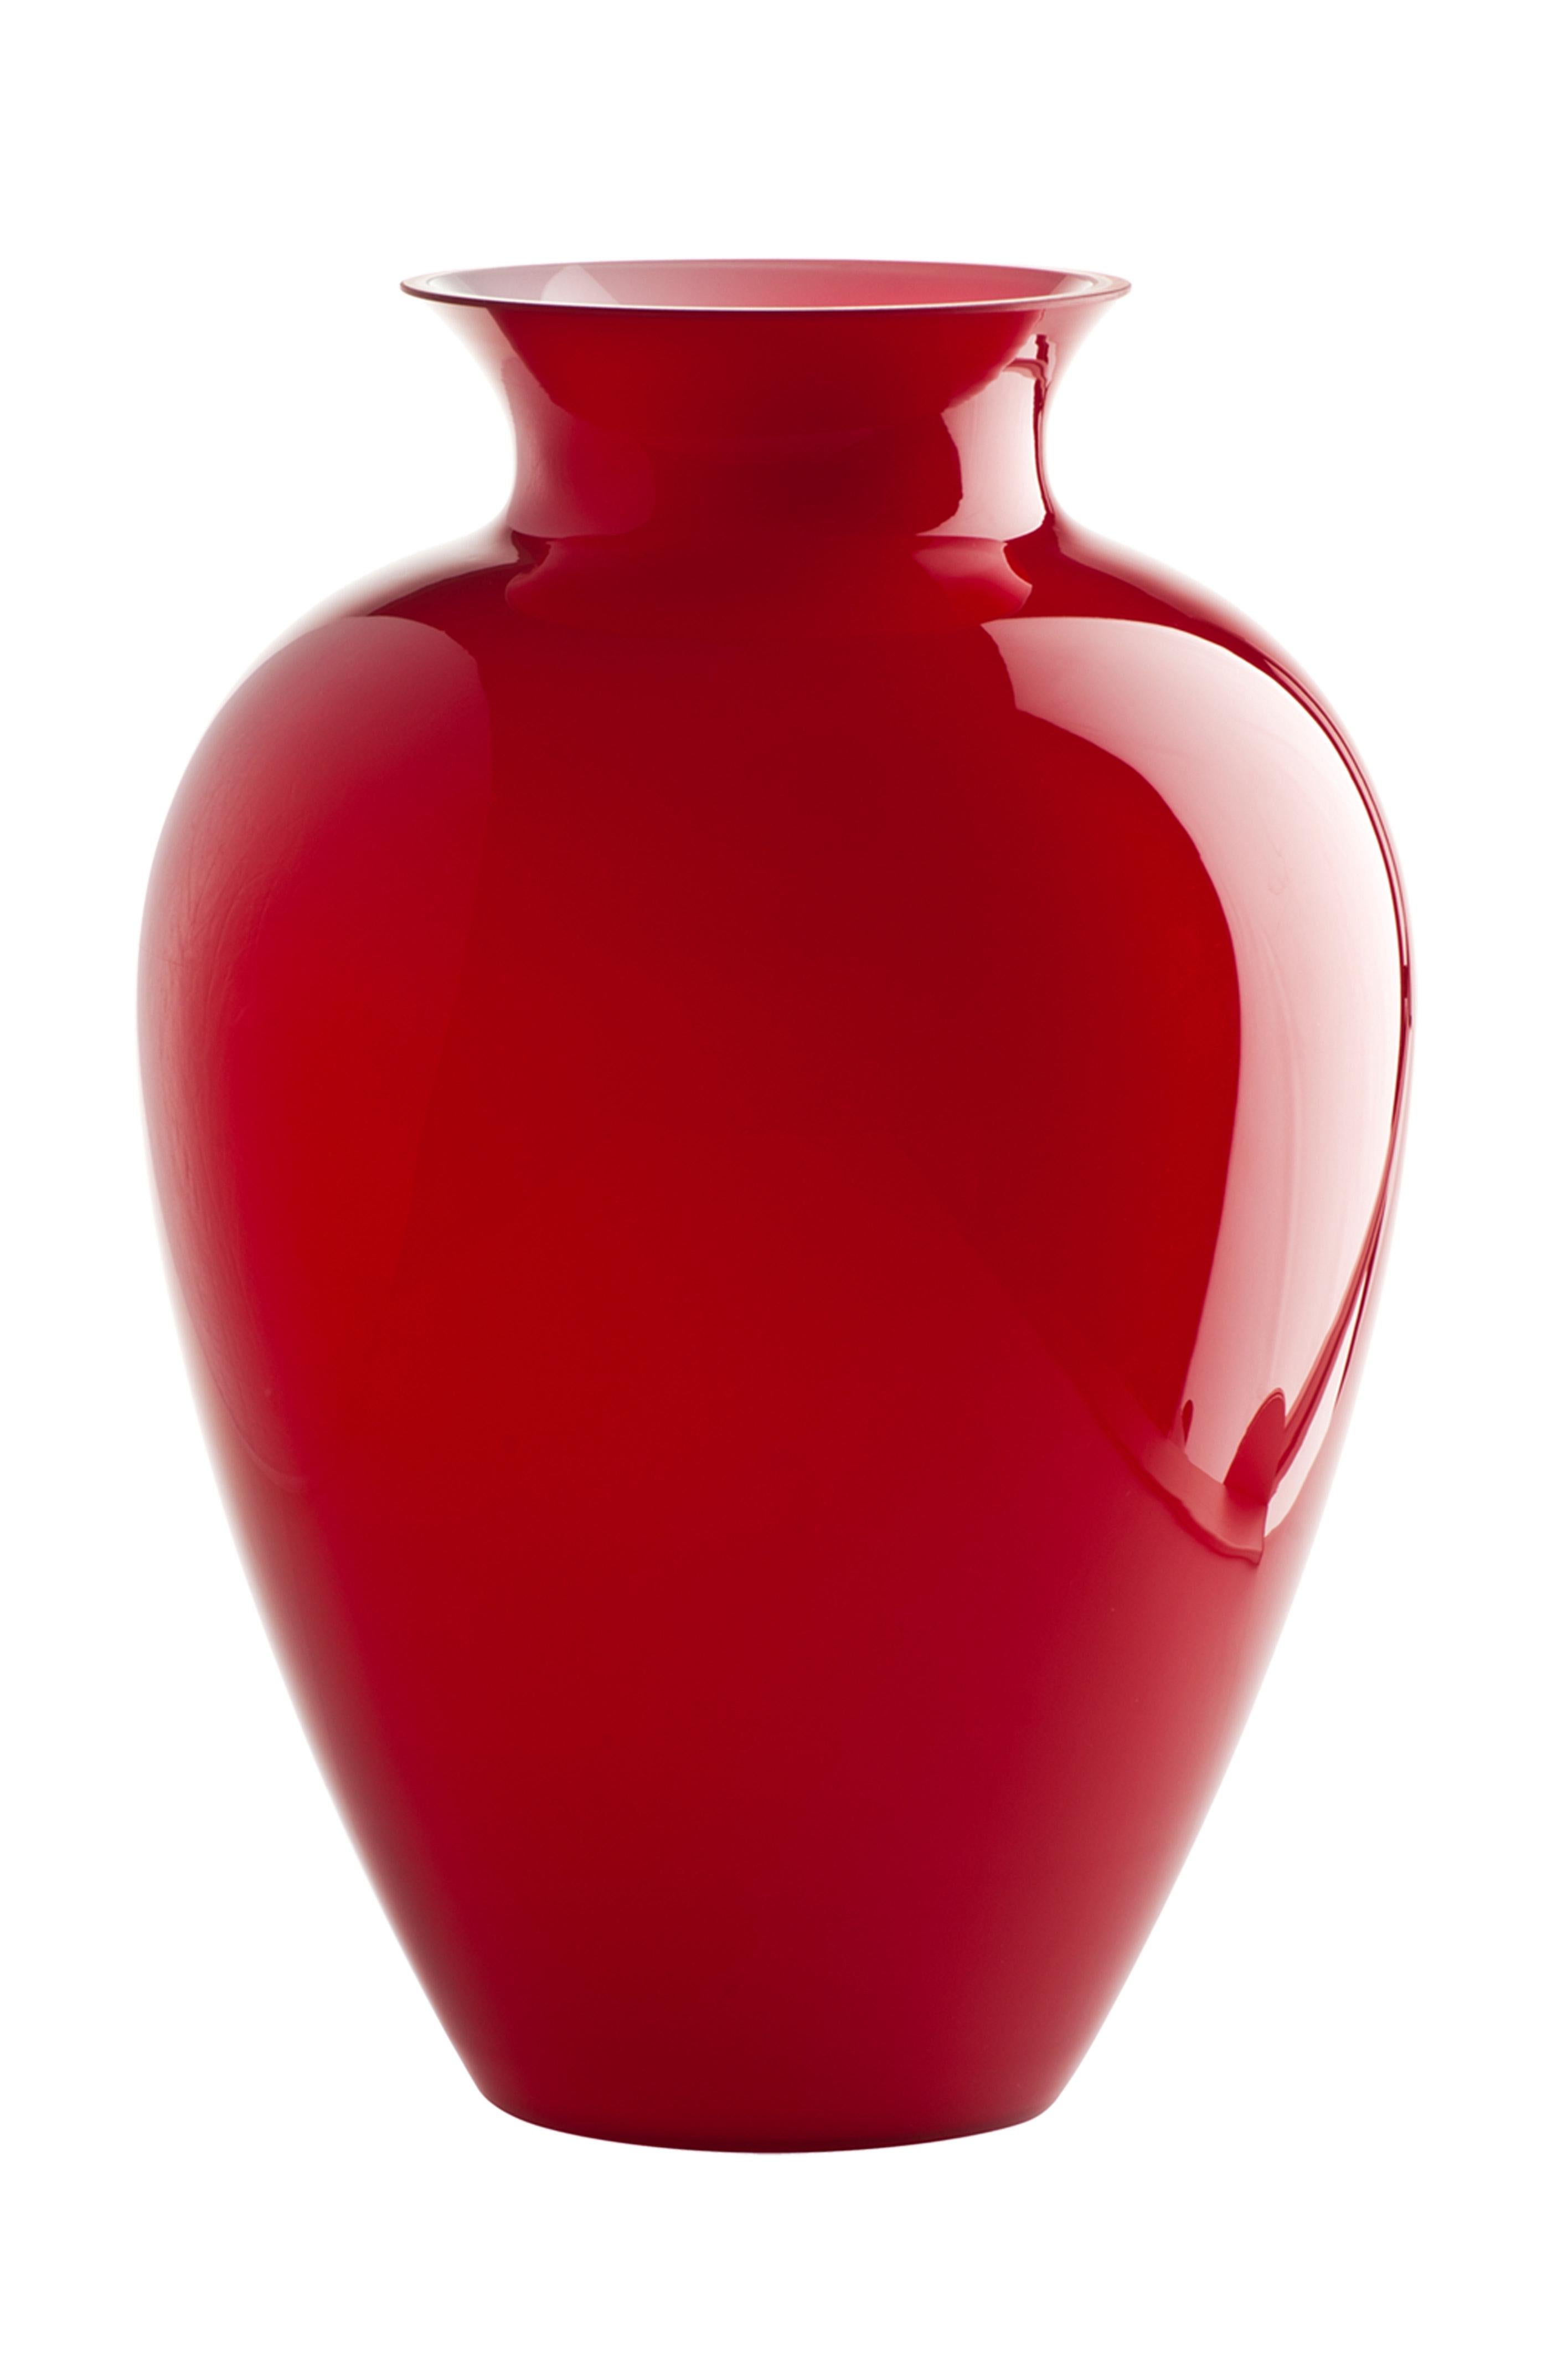 Venini glass vase with full, round body and funnel shaped neck in red. Perfect for indoor home decor as container or strong statement piece for any room.

Dimensions: 27.5 cm diameter x 38.5 cm height.